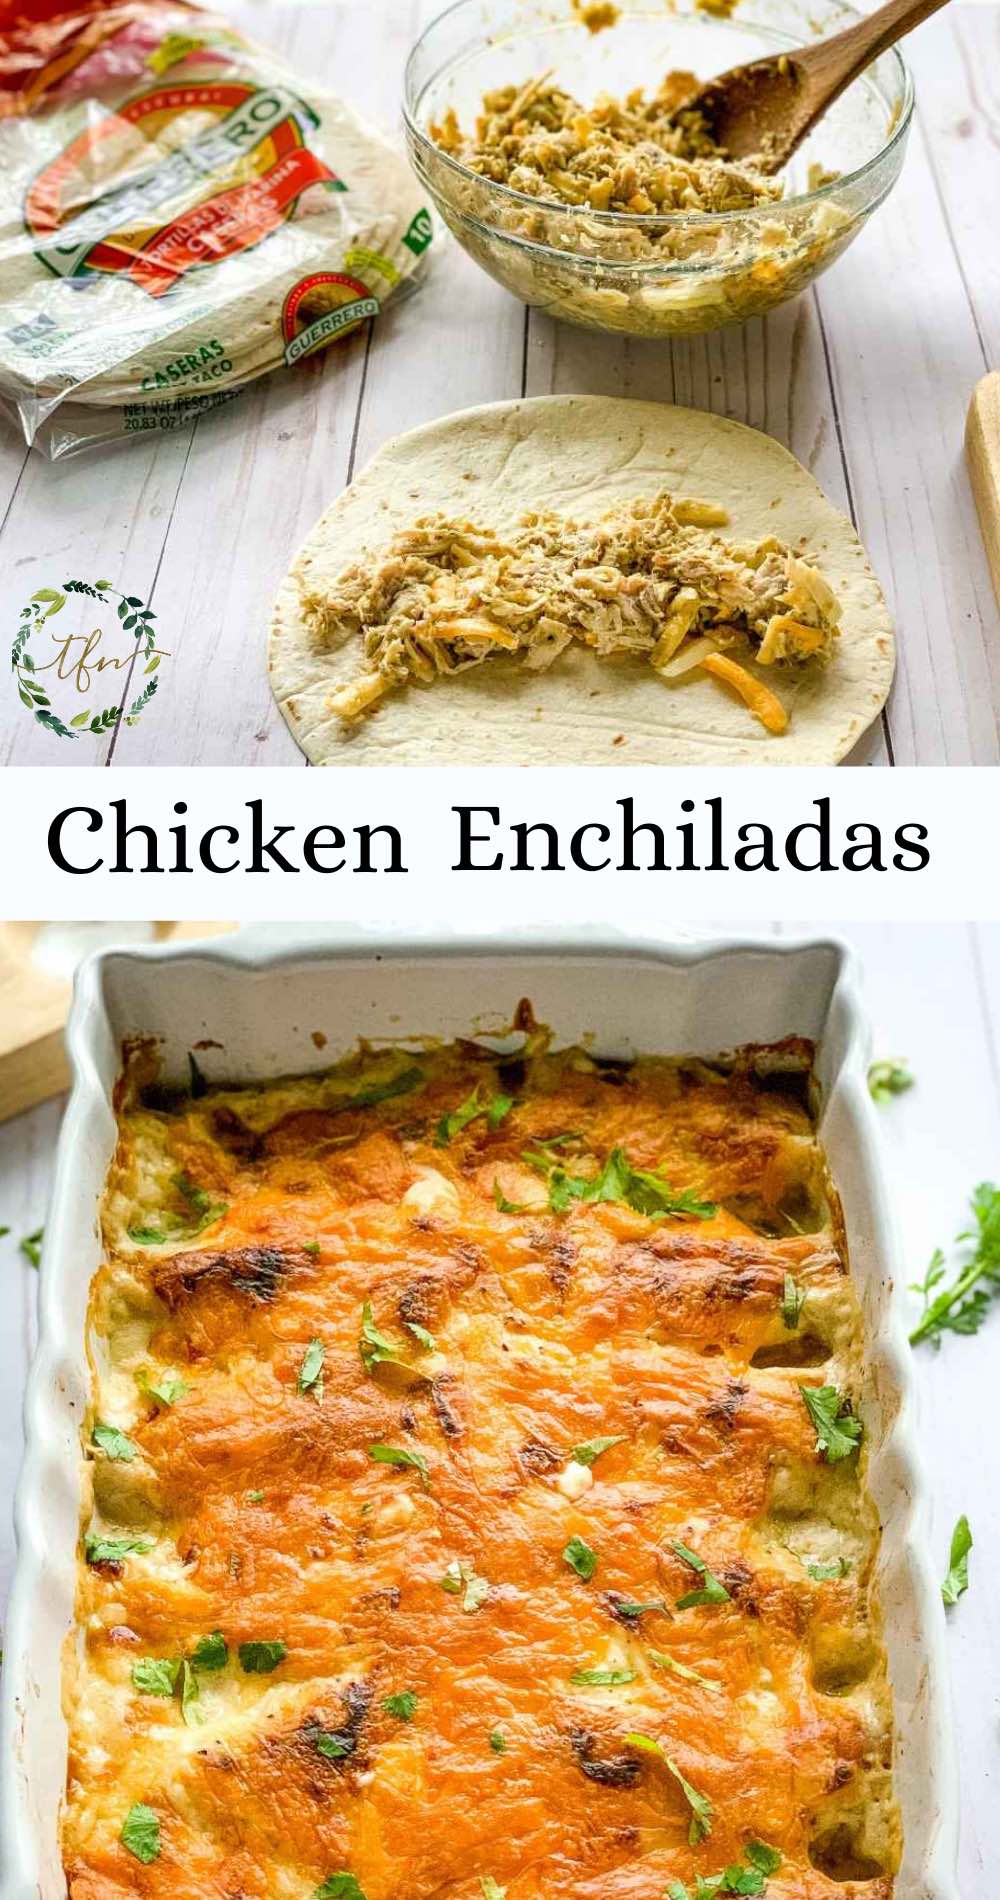 A photo showing the preparation and finished creamy chicken enchiladas casserole